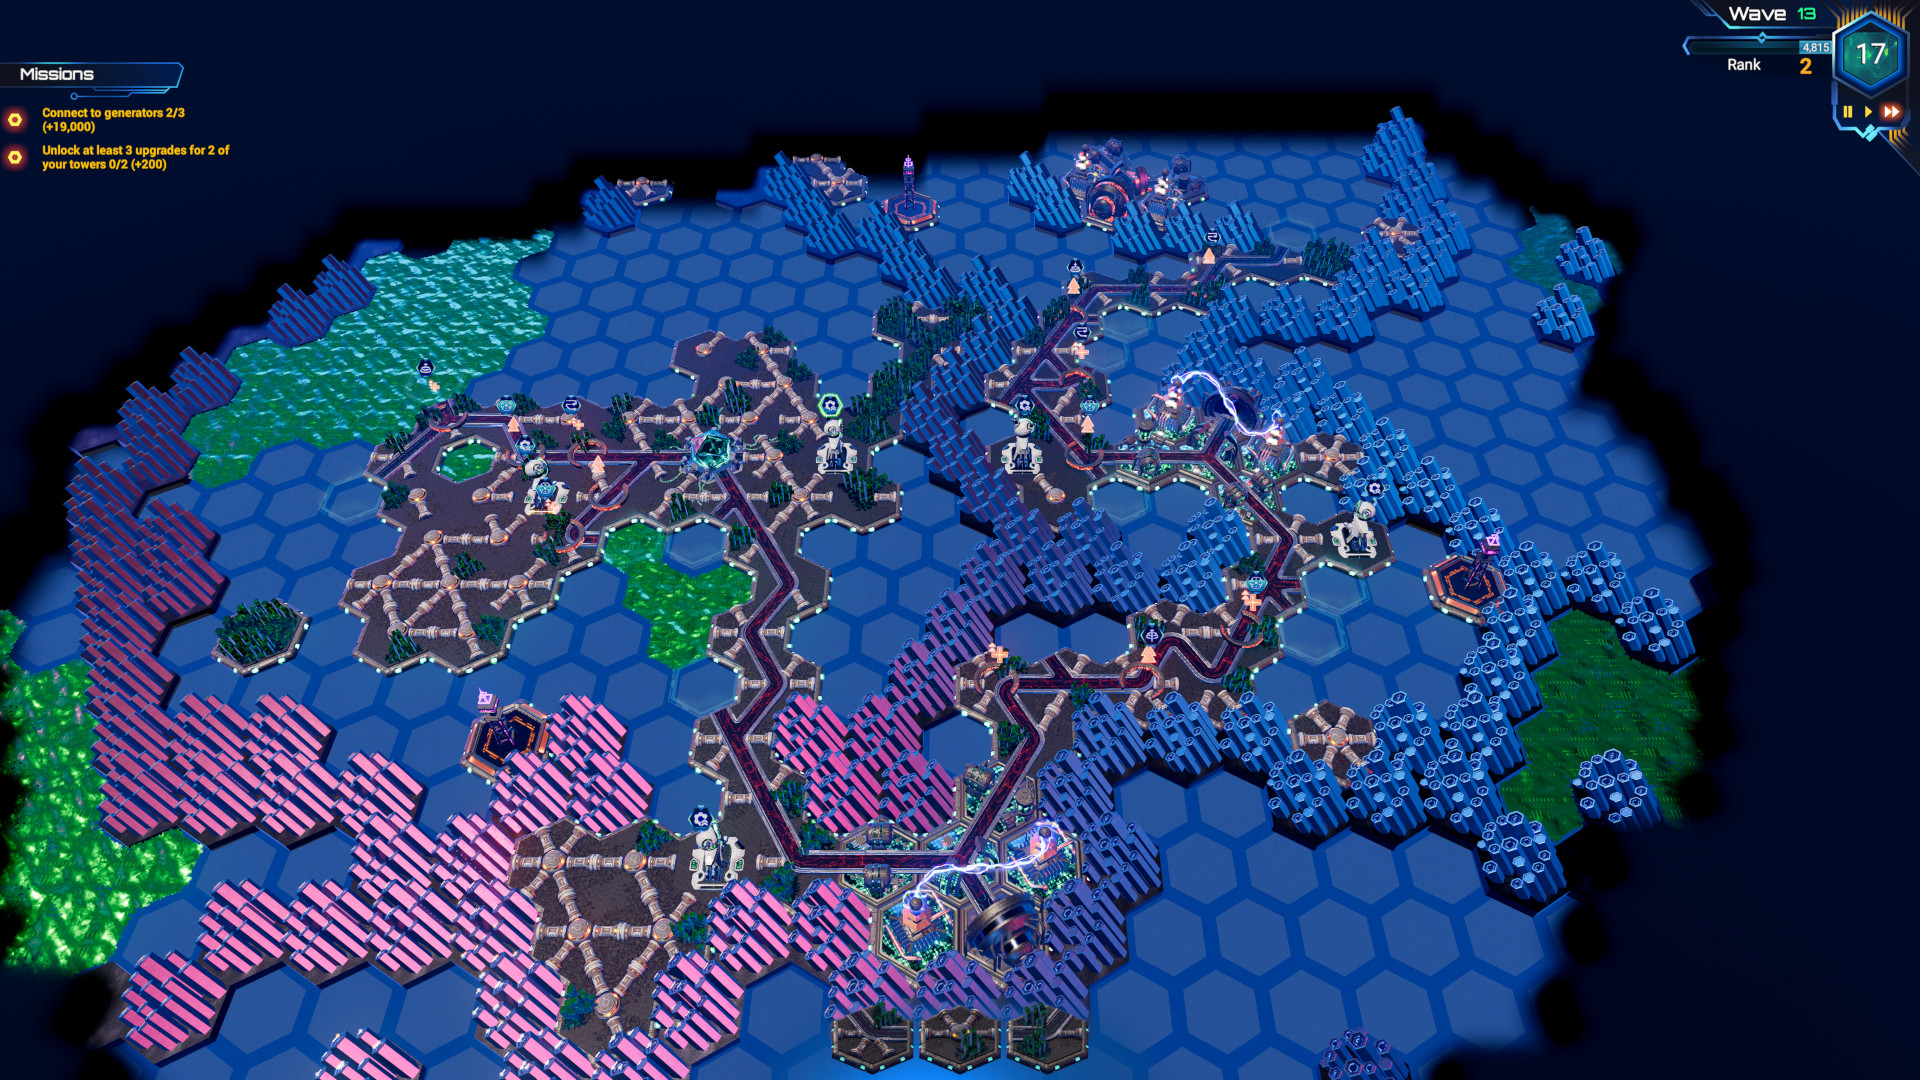 Explore cyberspace and its different biomes